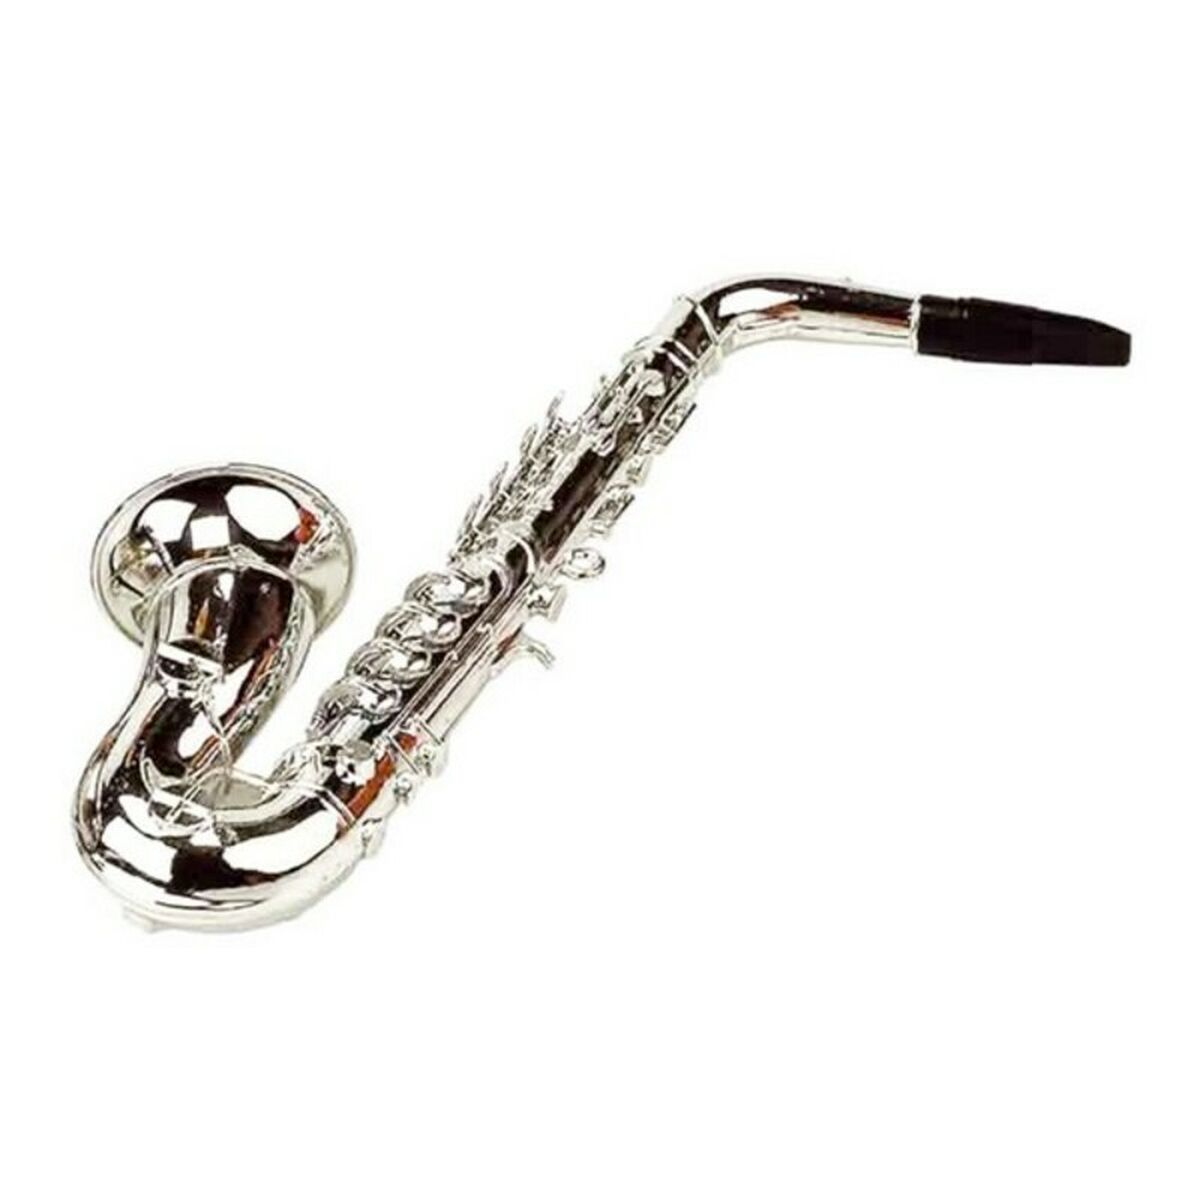 Musical Toy Reig 41 cm 8-note saxophone (3+ years)